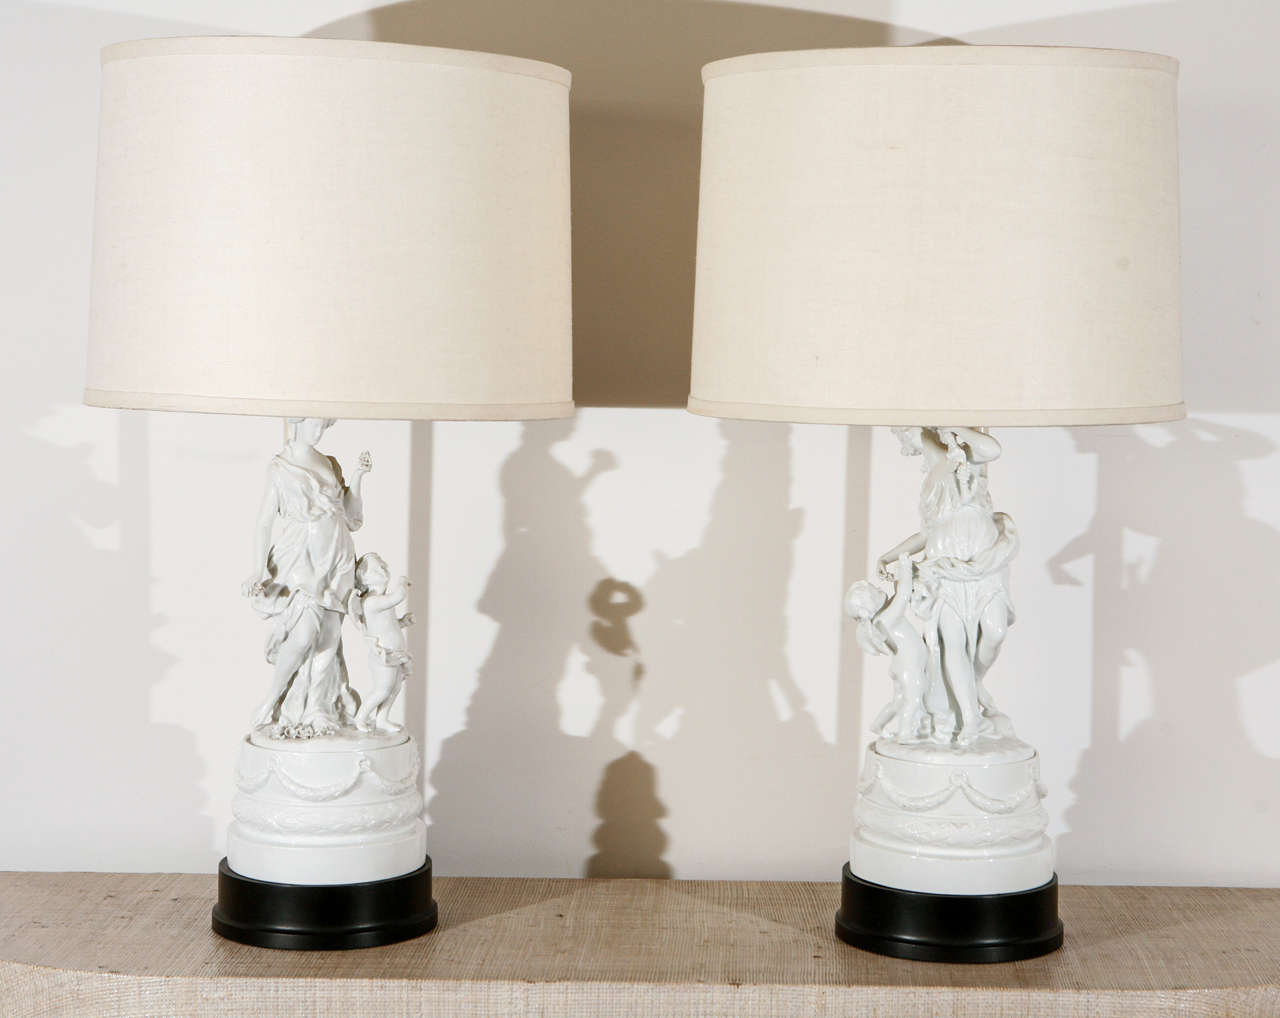 Unique pair of William Haines lamps from the Ann Rutherford Dozier estate in Beverly Hills, 1942.  The lamps have Haines' distinctive pedestal bases and French mounted linen shades, with a pair of original 19th century porcelain figures.  

The